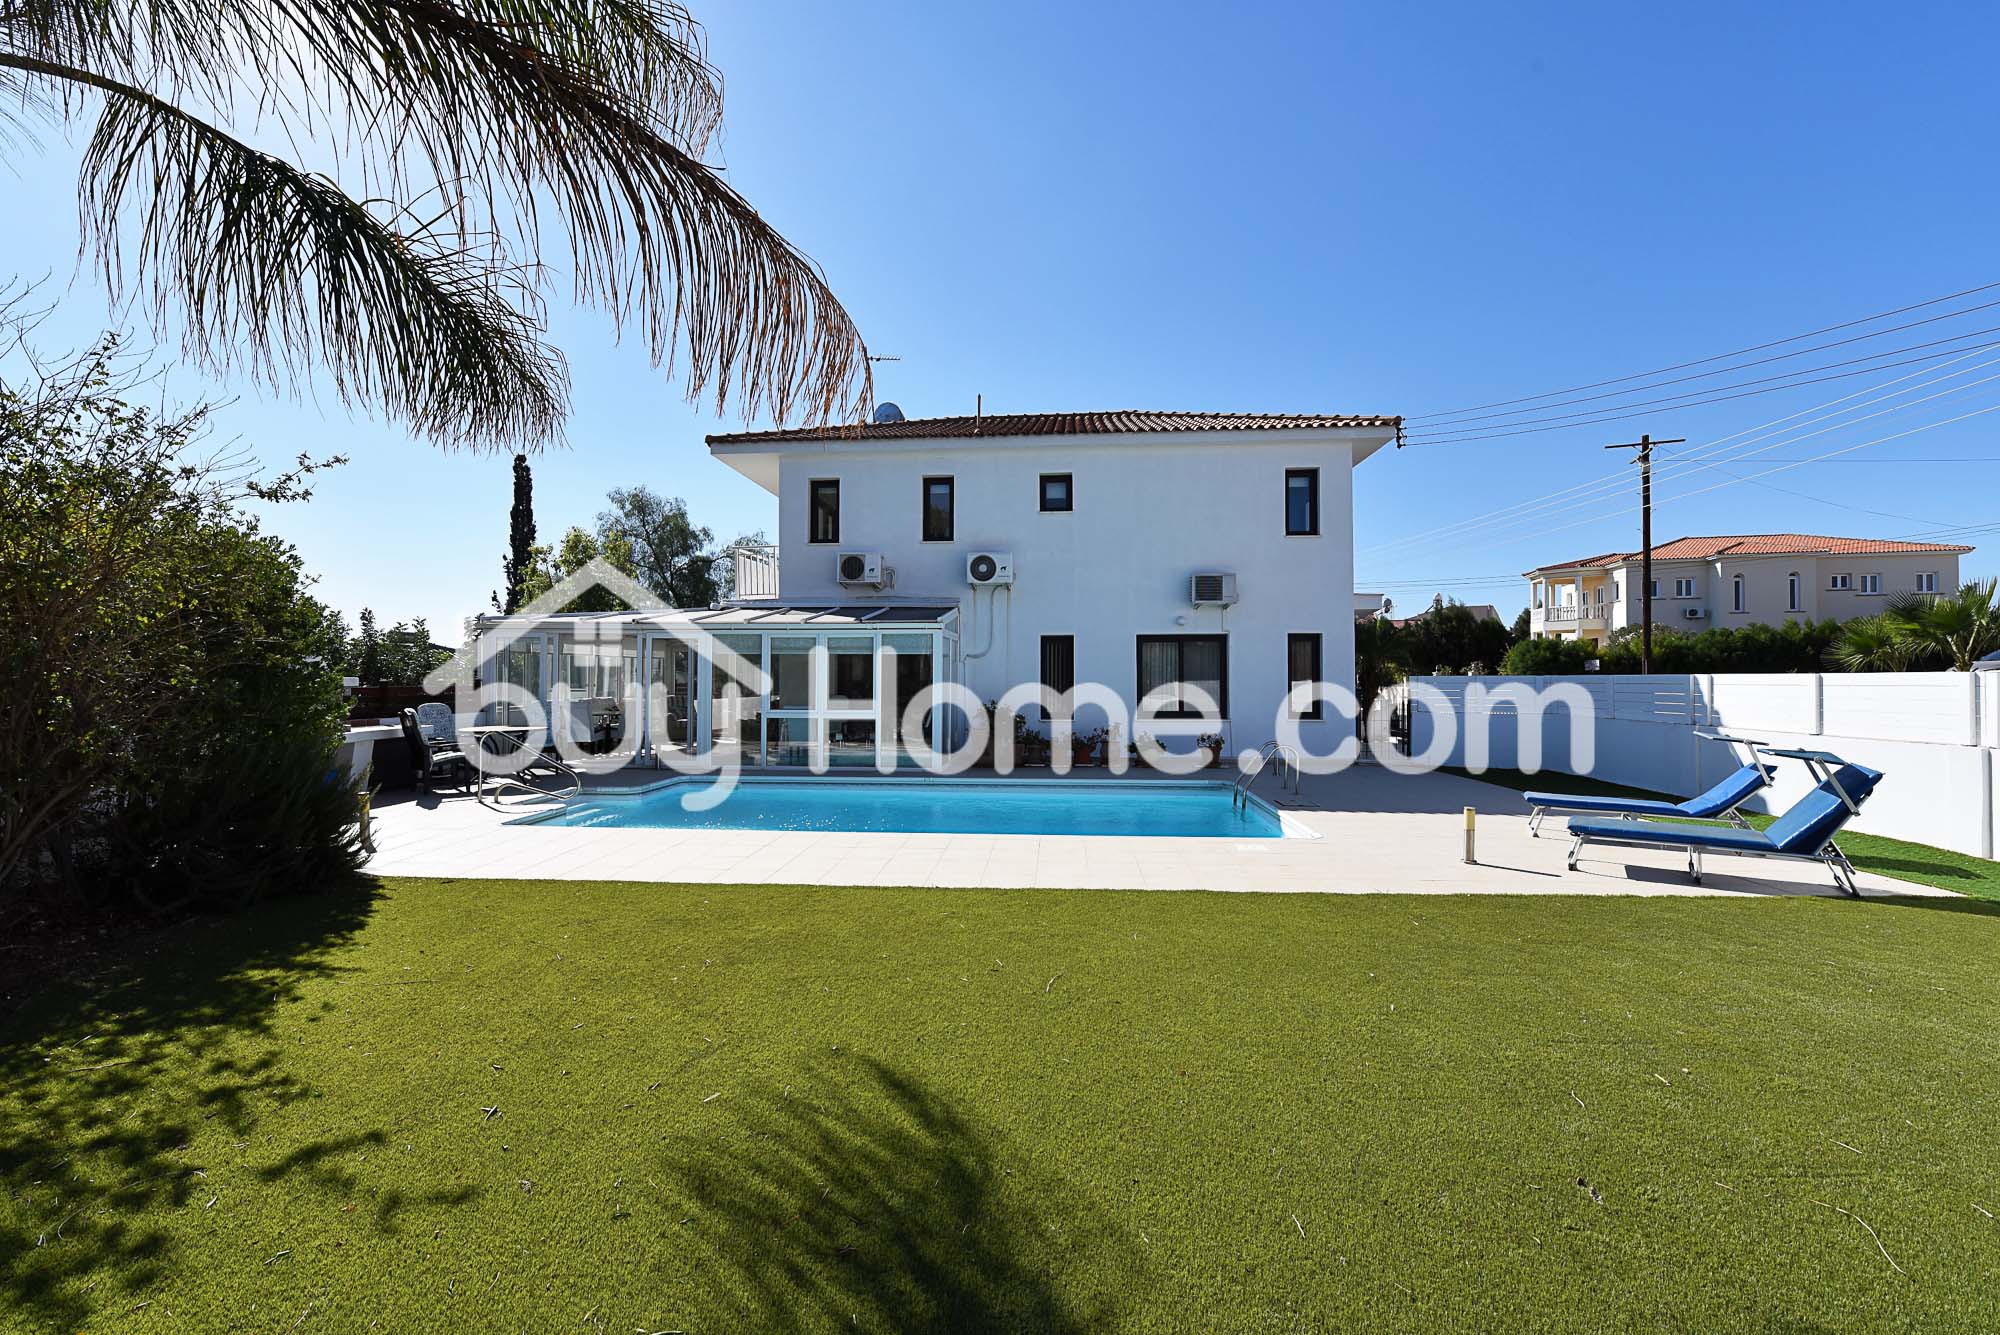 Lovely 3 Bedroom House with Pool | BuyHome